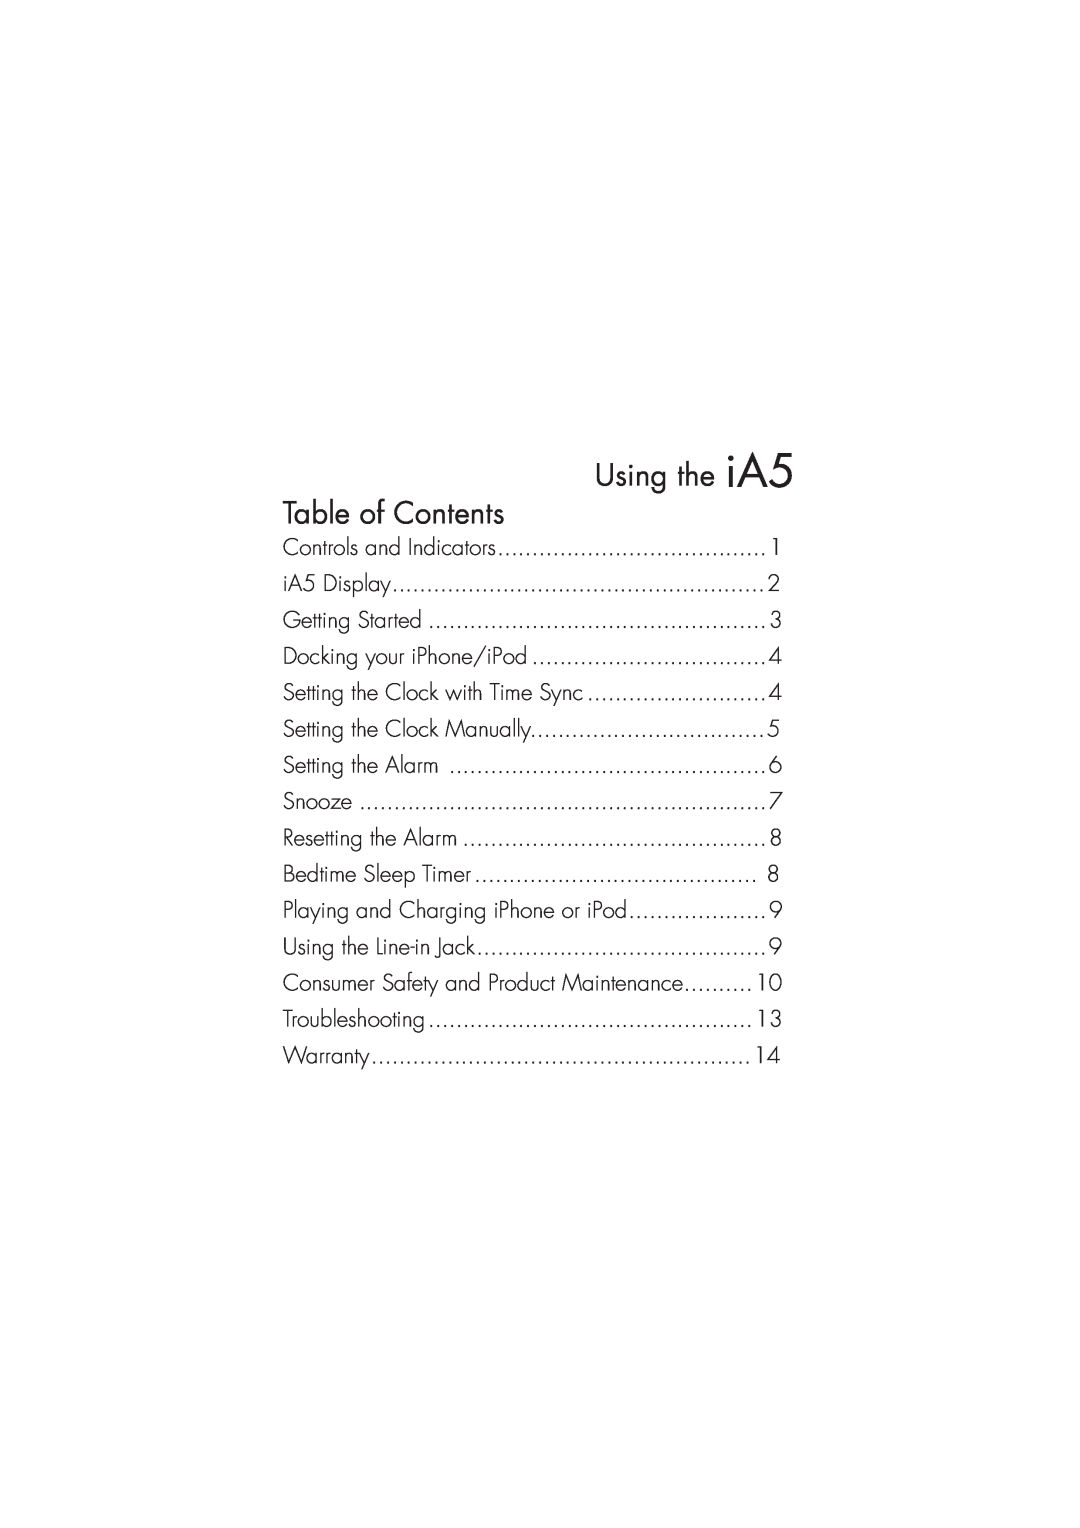 iHome ia5 instruction manual Using the iA5, Table of Contents 